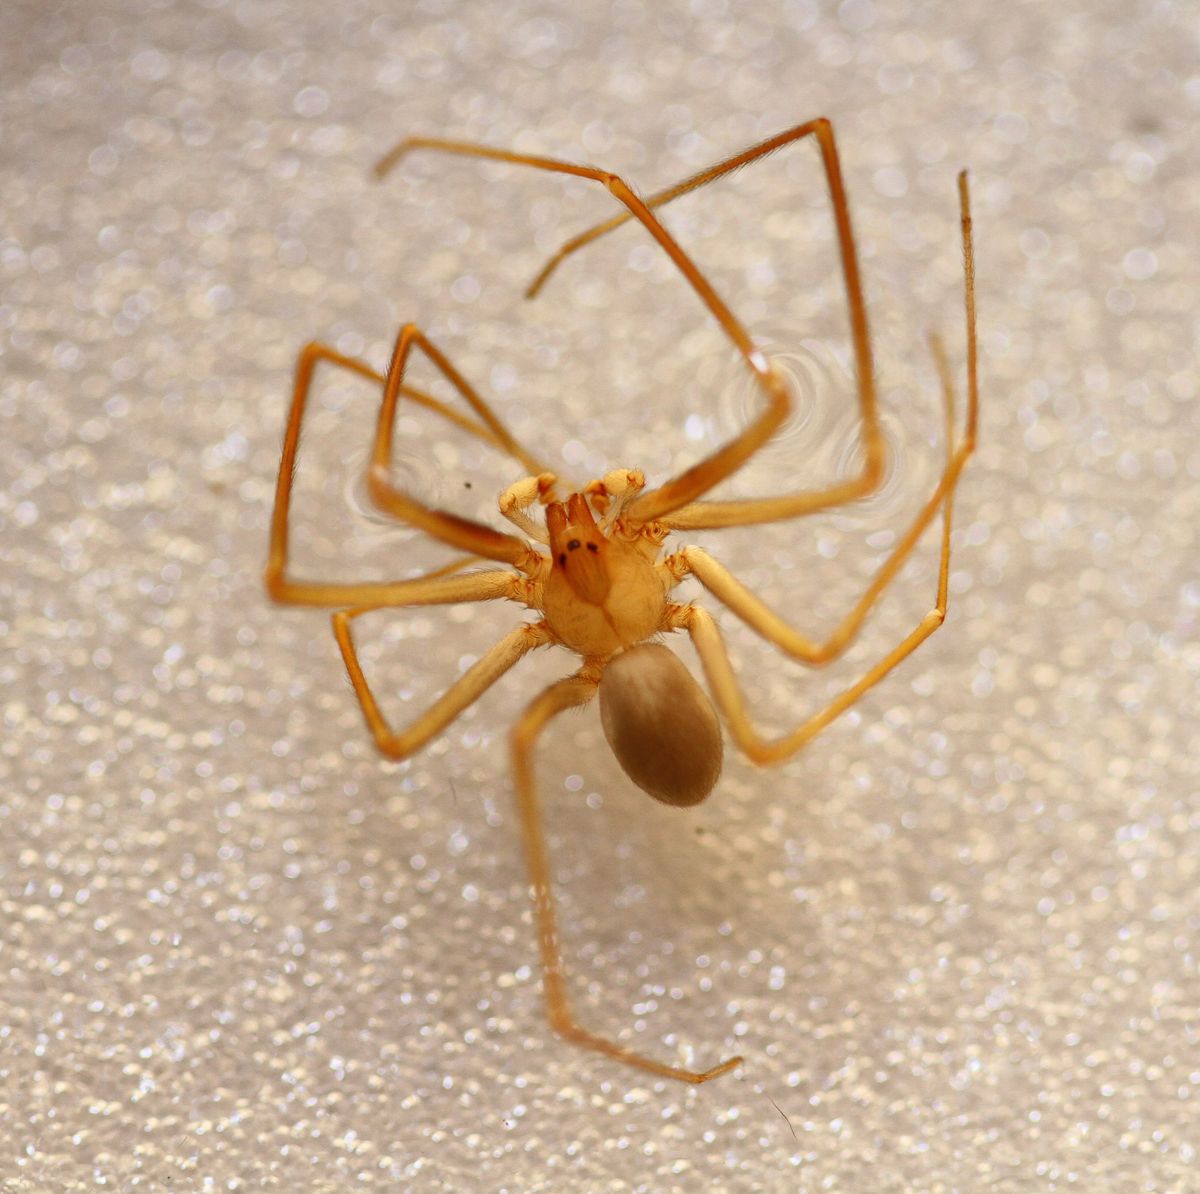 Are Brown Recluses Making a Home In Your Barn? - Mid-Rivers Equine Centre